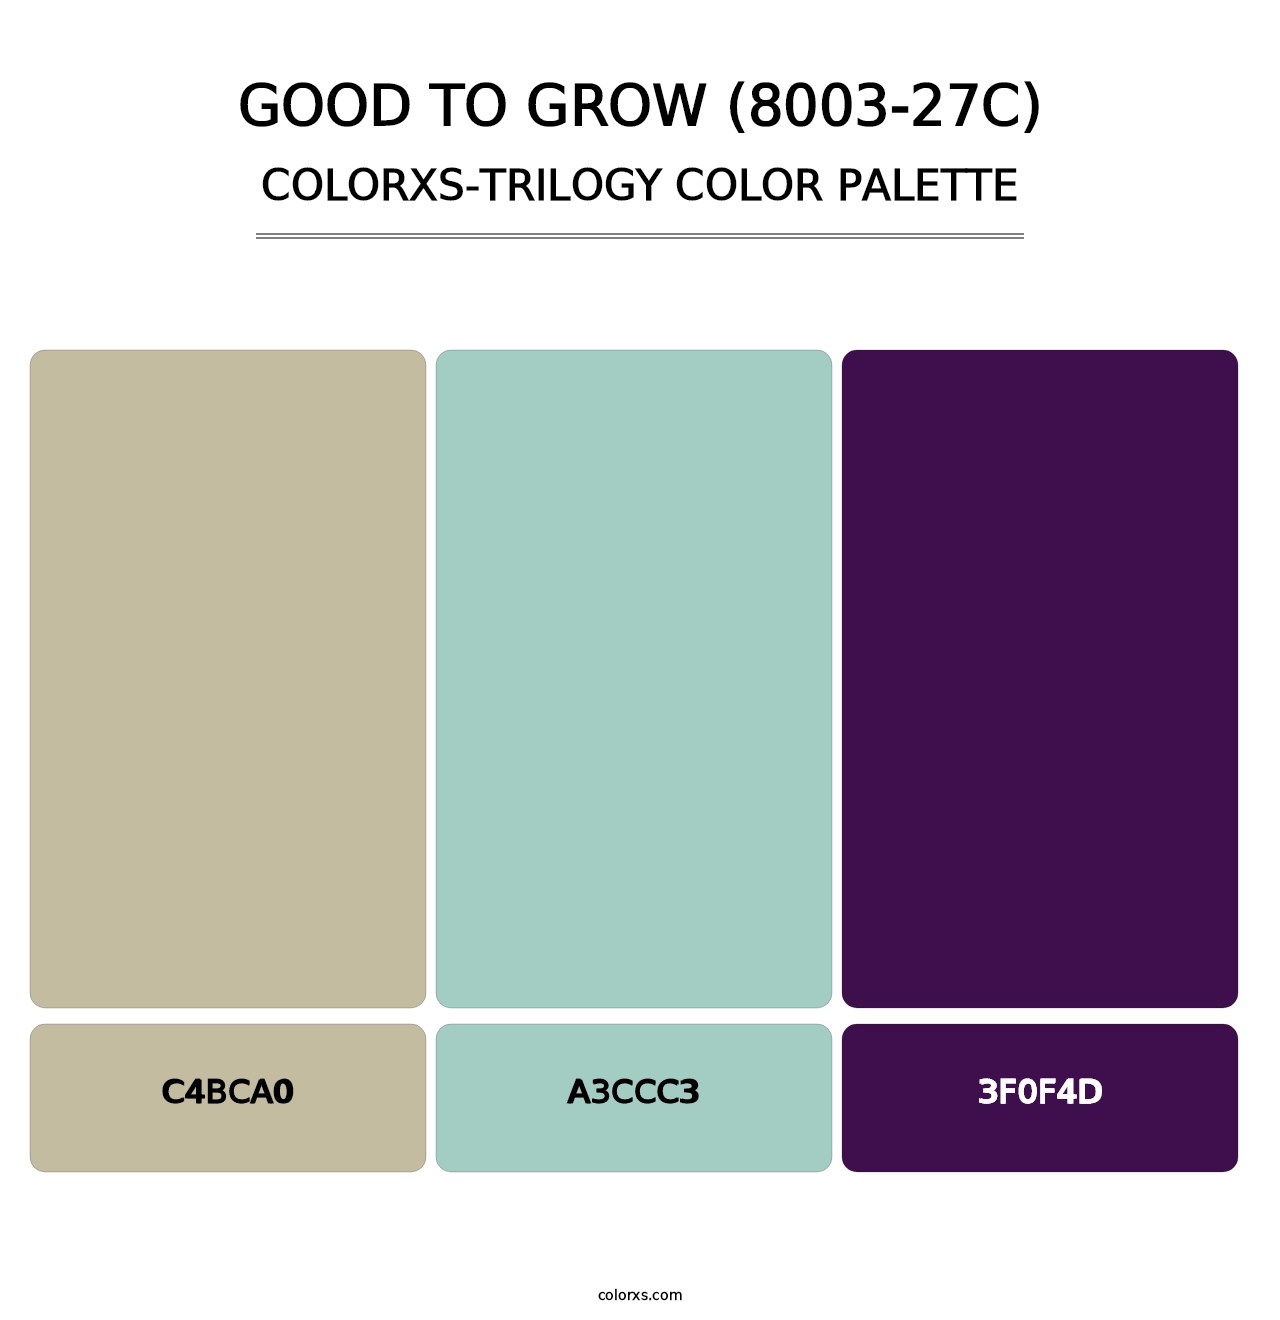 Good to Grow (8003-27C) - Colorxs Trilogy Palette